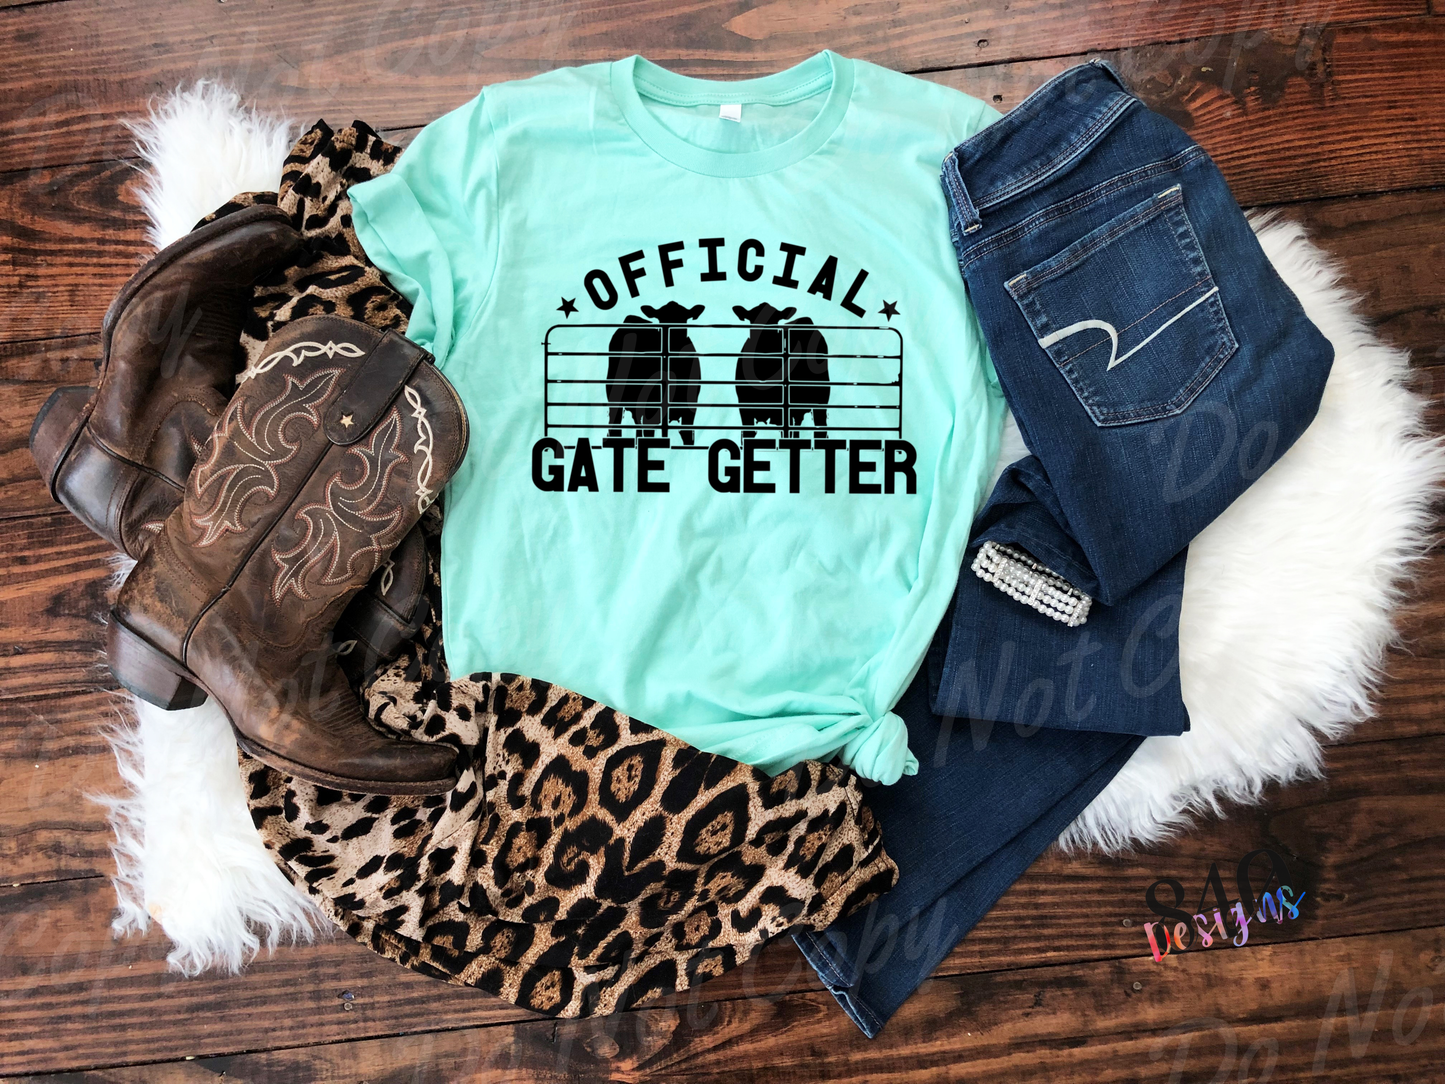 Official Gate Getter (GATE) - 840 EXCLUSIVE